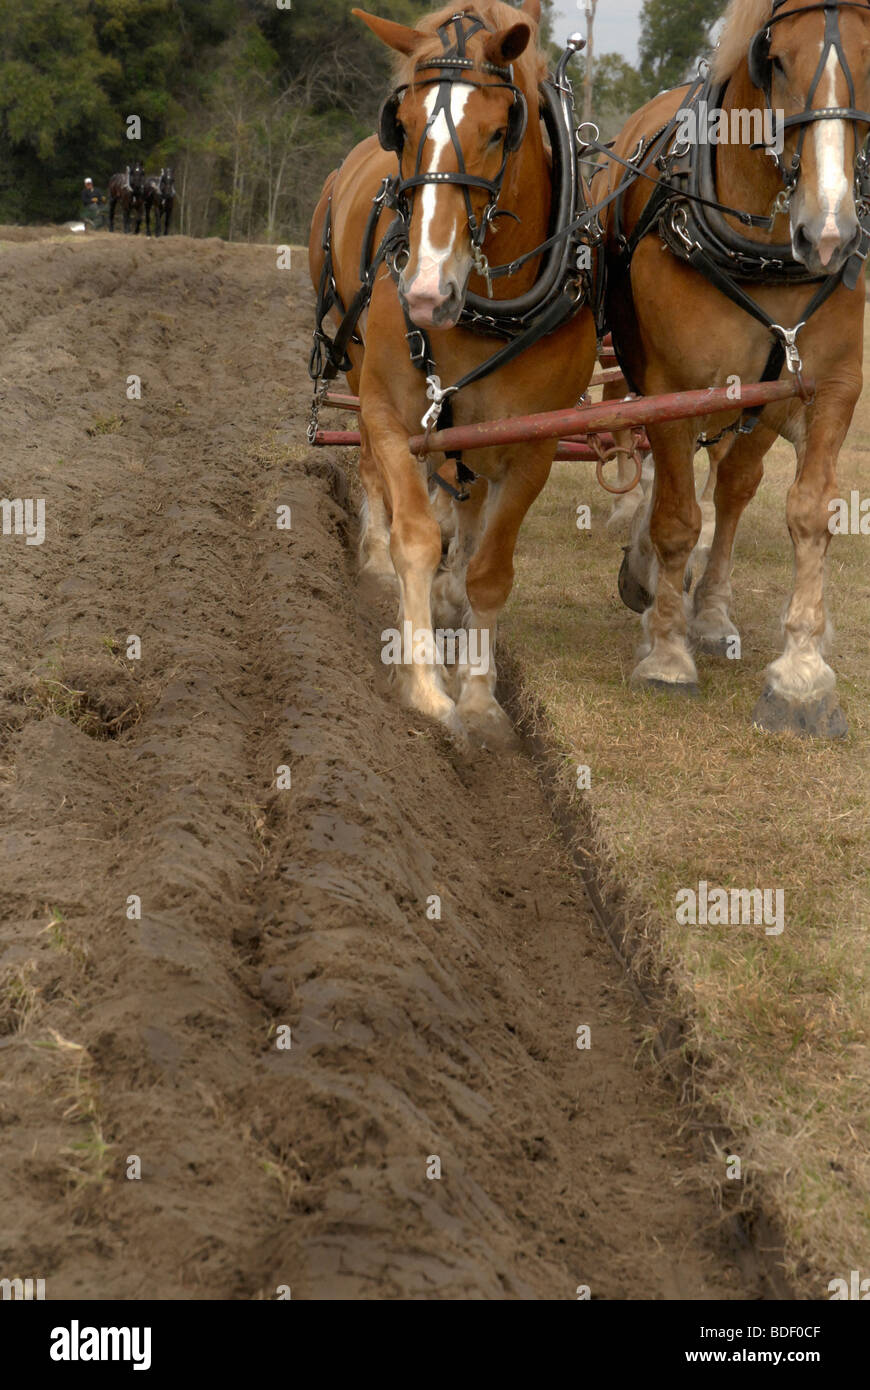 Annual Plow Days Festival at Dudley Farm Historic State Park, Newberry, Florida--National Register of Historic Places. Stock Photo